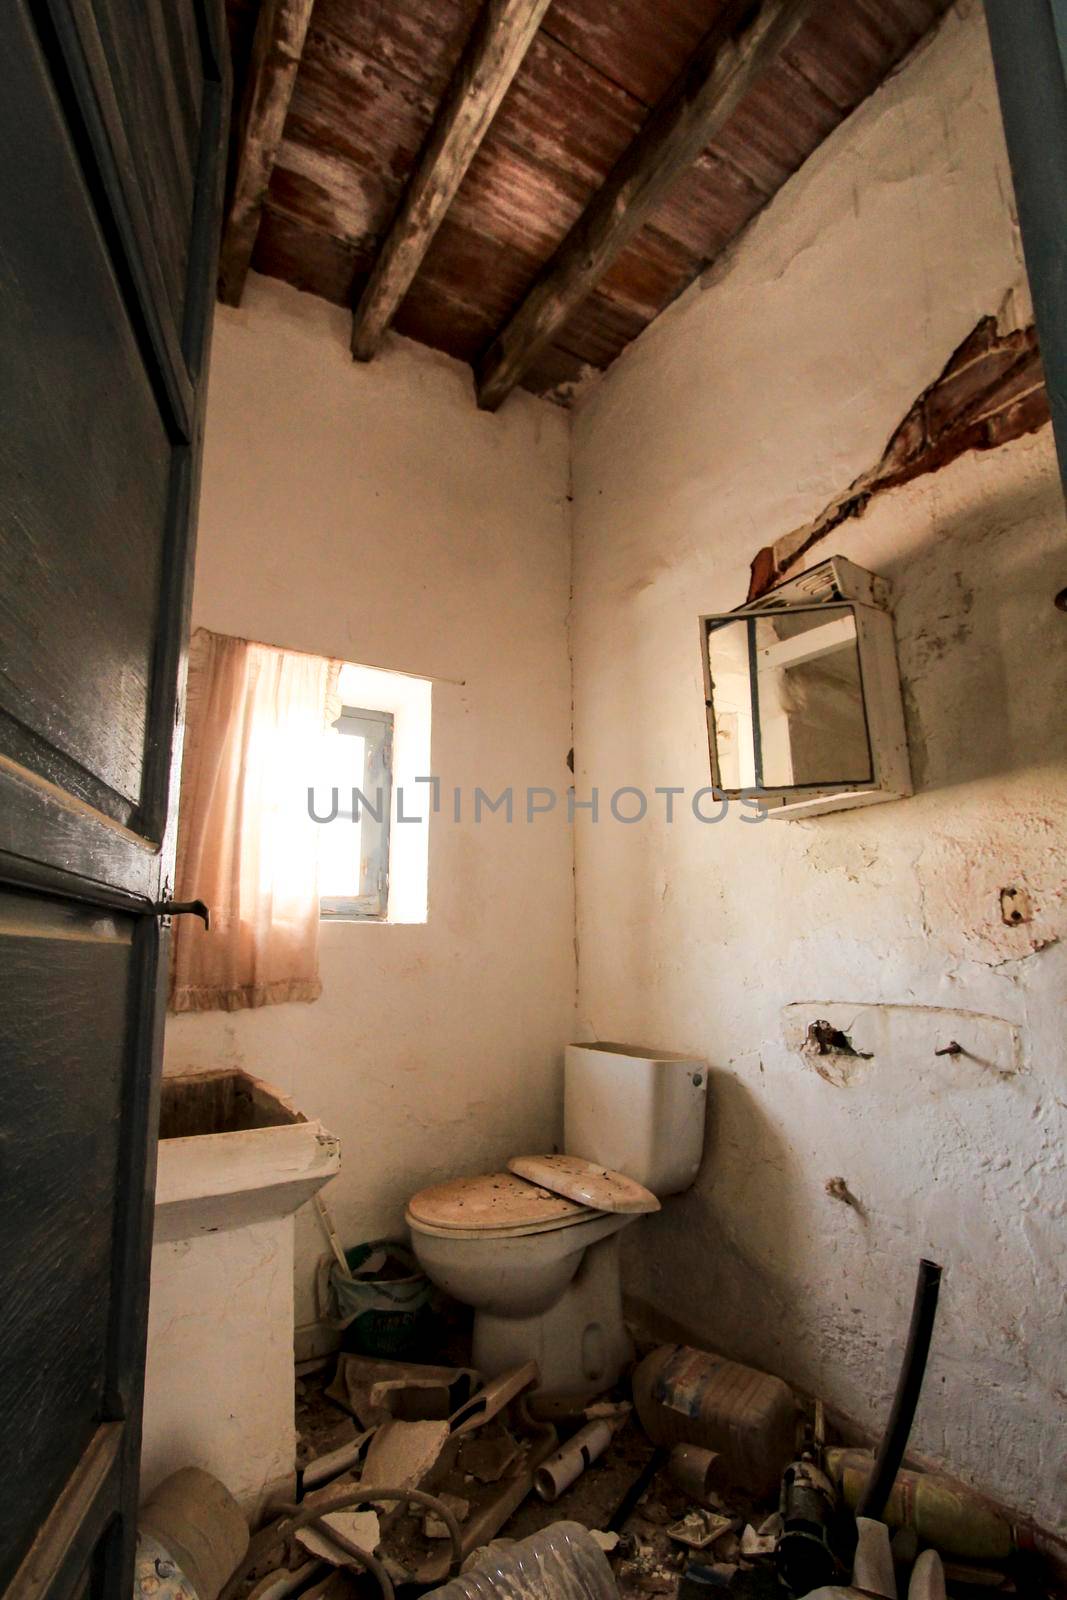 Remains of toilet of abandoned building of the gold mines of Rodalquilar village in Almeria province, Andalusia community, Spain.